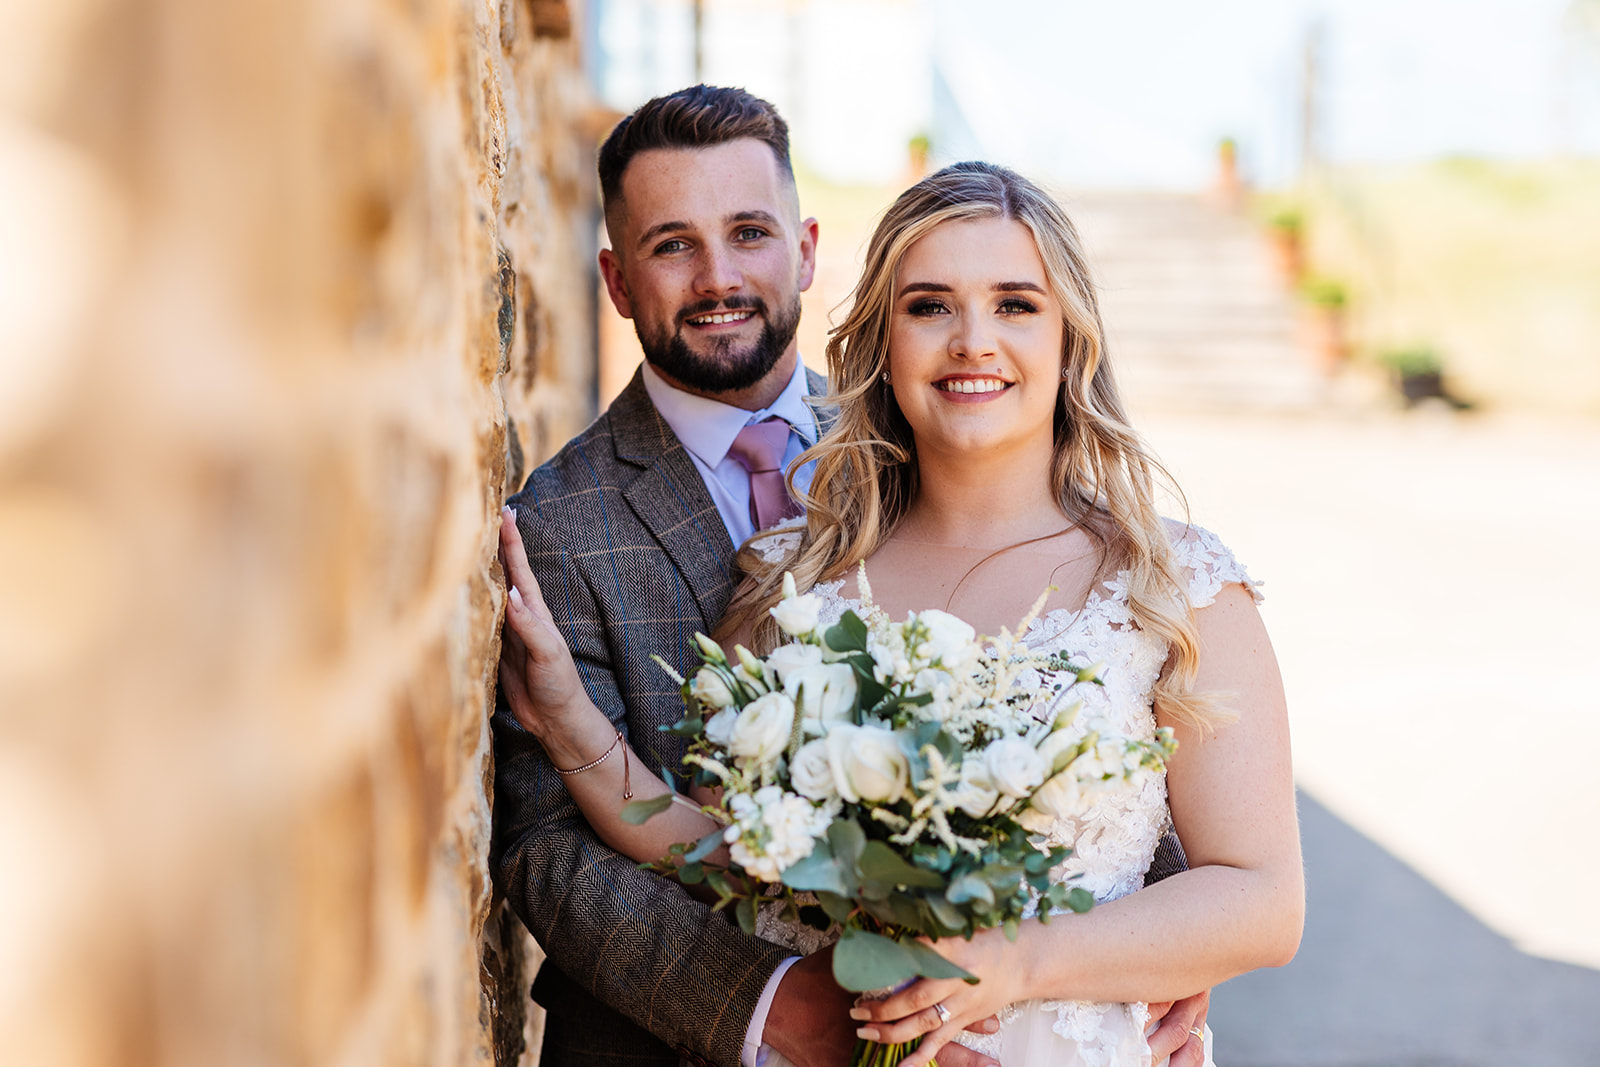 Couple shot outside leaning against sandstone brick wall 